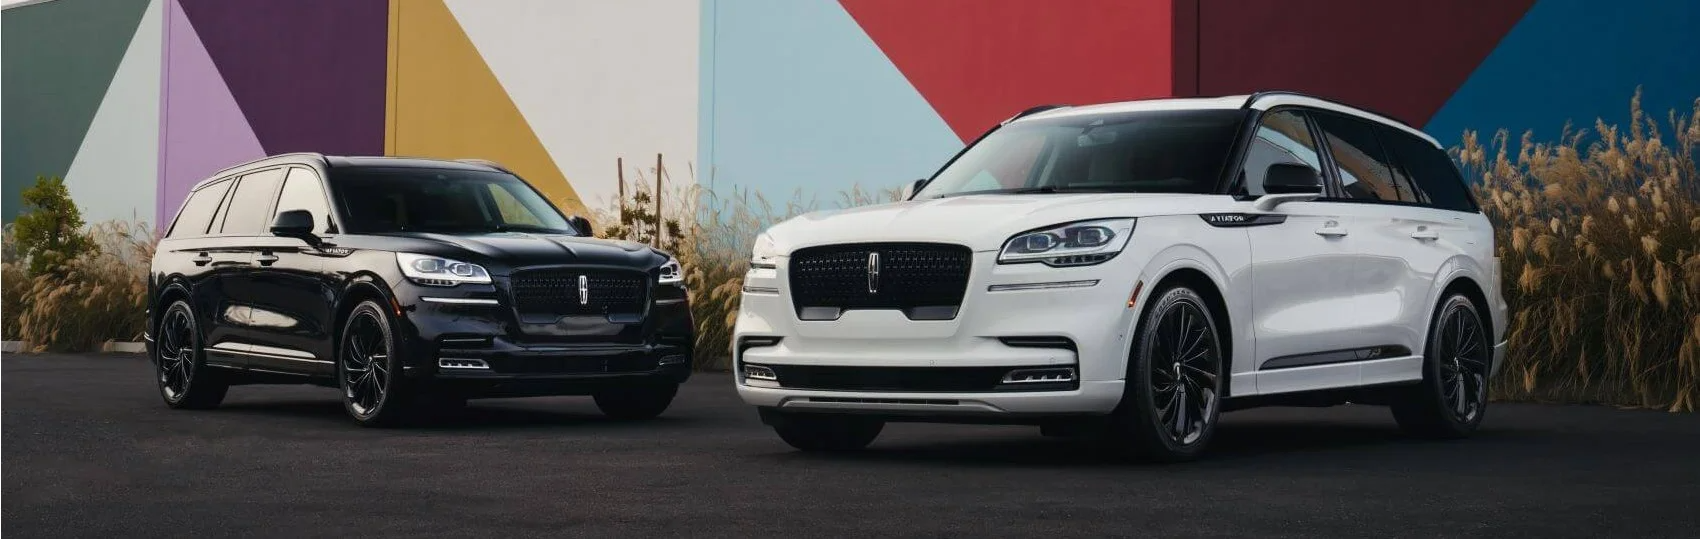 2022 Lincoln Aviator Snipped